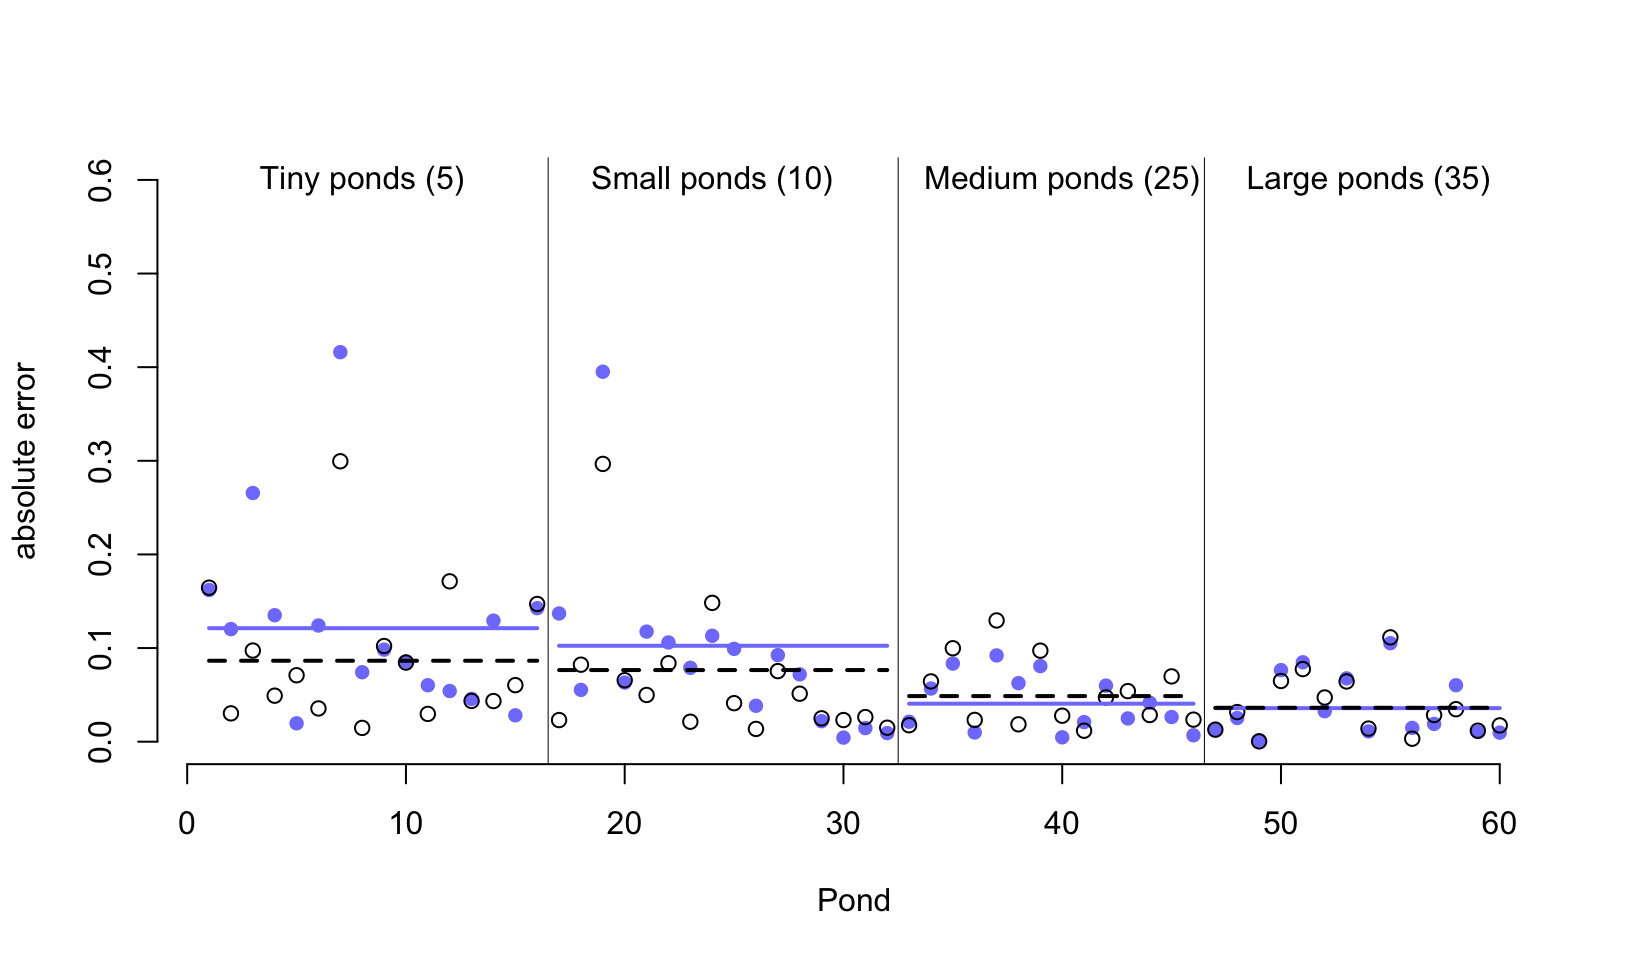 Error of no-pooling and partial pooling estimates, for the simulated tadpole ponds. The horizontal axis displays pond number. The vertical axis measures the absolute error in the predicted proportion of survivors, compared to the true value used in the simulation. The higher the point, the worse the estimate. No-pooling shown in blue. Partial pooling shown in black. The blue and dashed black lines show the average error for each kind of estimate, across each initial density of tadpoles (pond size). Smaller ponds porduce more error, but the partial pooling estimates are better on average, especially in smaller ponds.